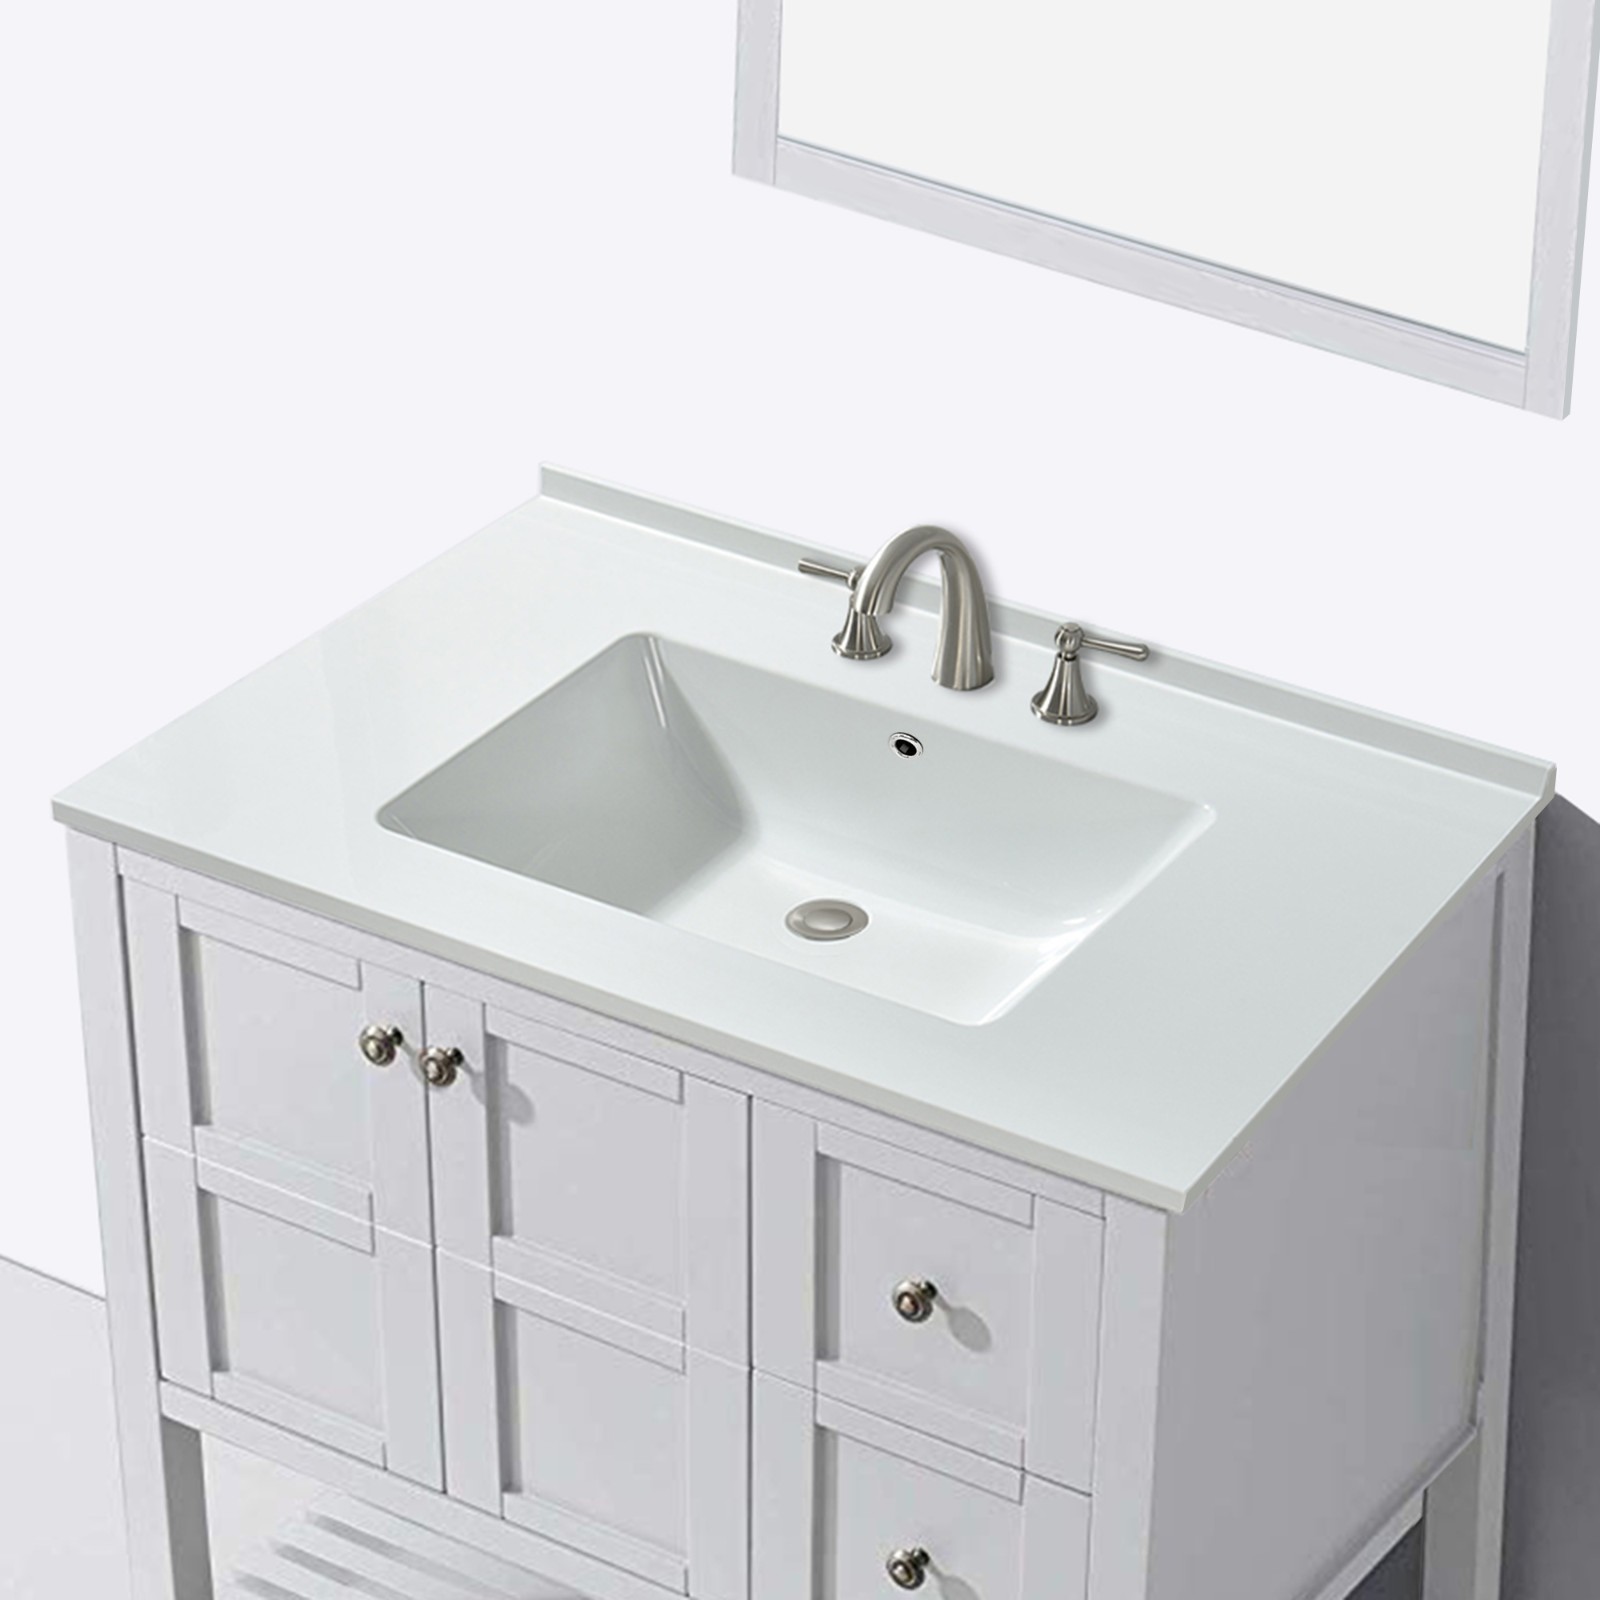  WOODBRIDGE VT4322-1000 Solid Surface Vanity Top with with Intergrated Sink and 3 Faucet Holes for 4-Inch Centerset Faucet, 43